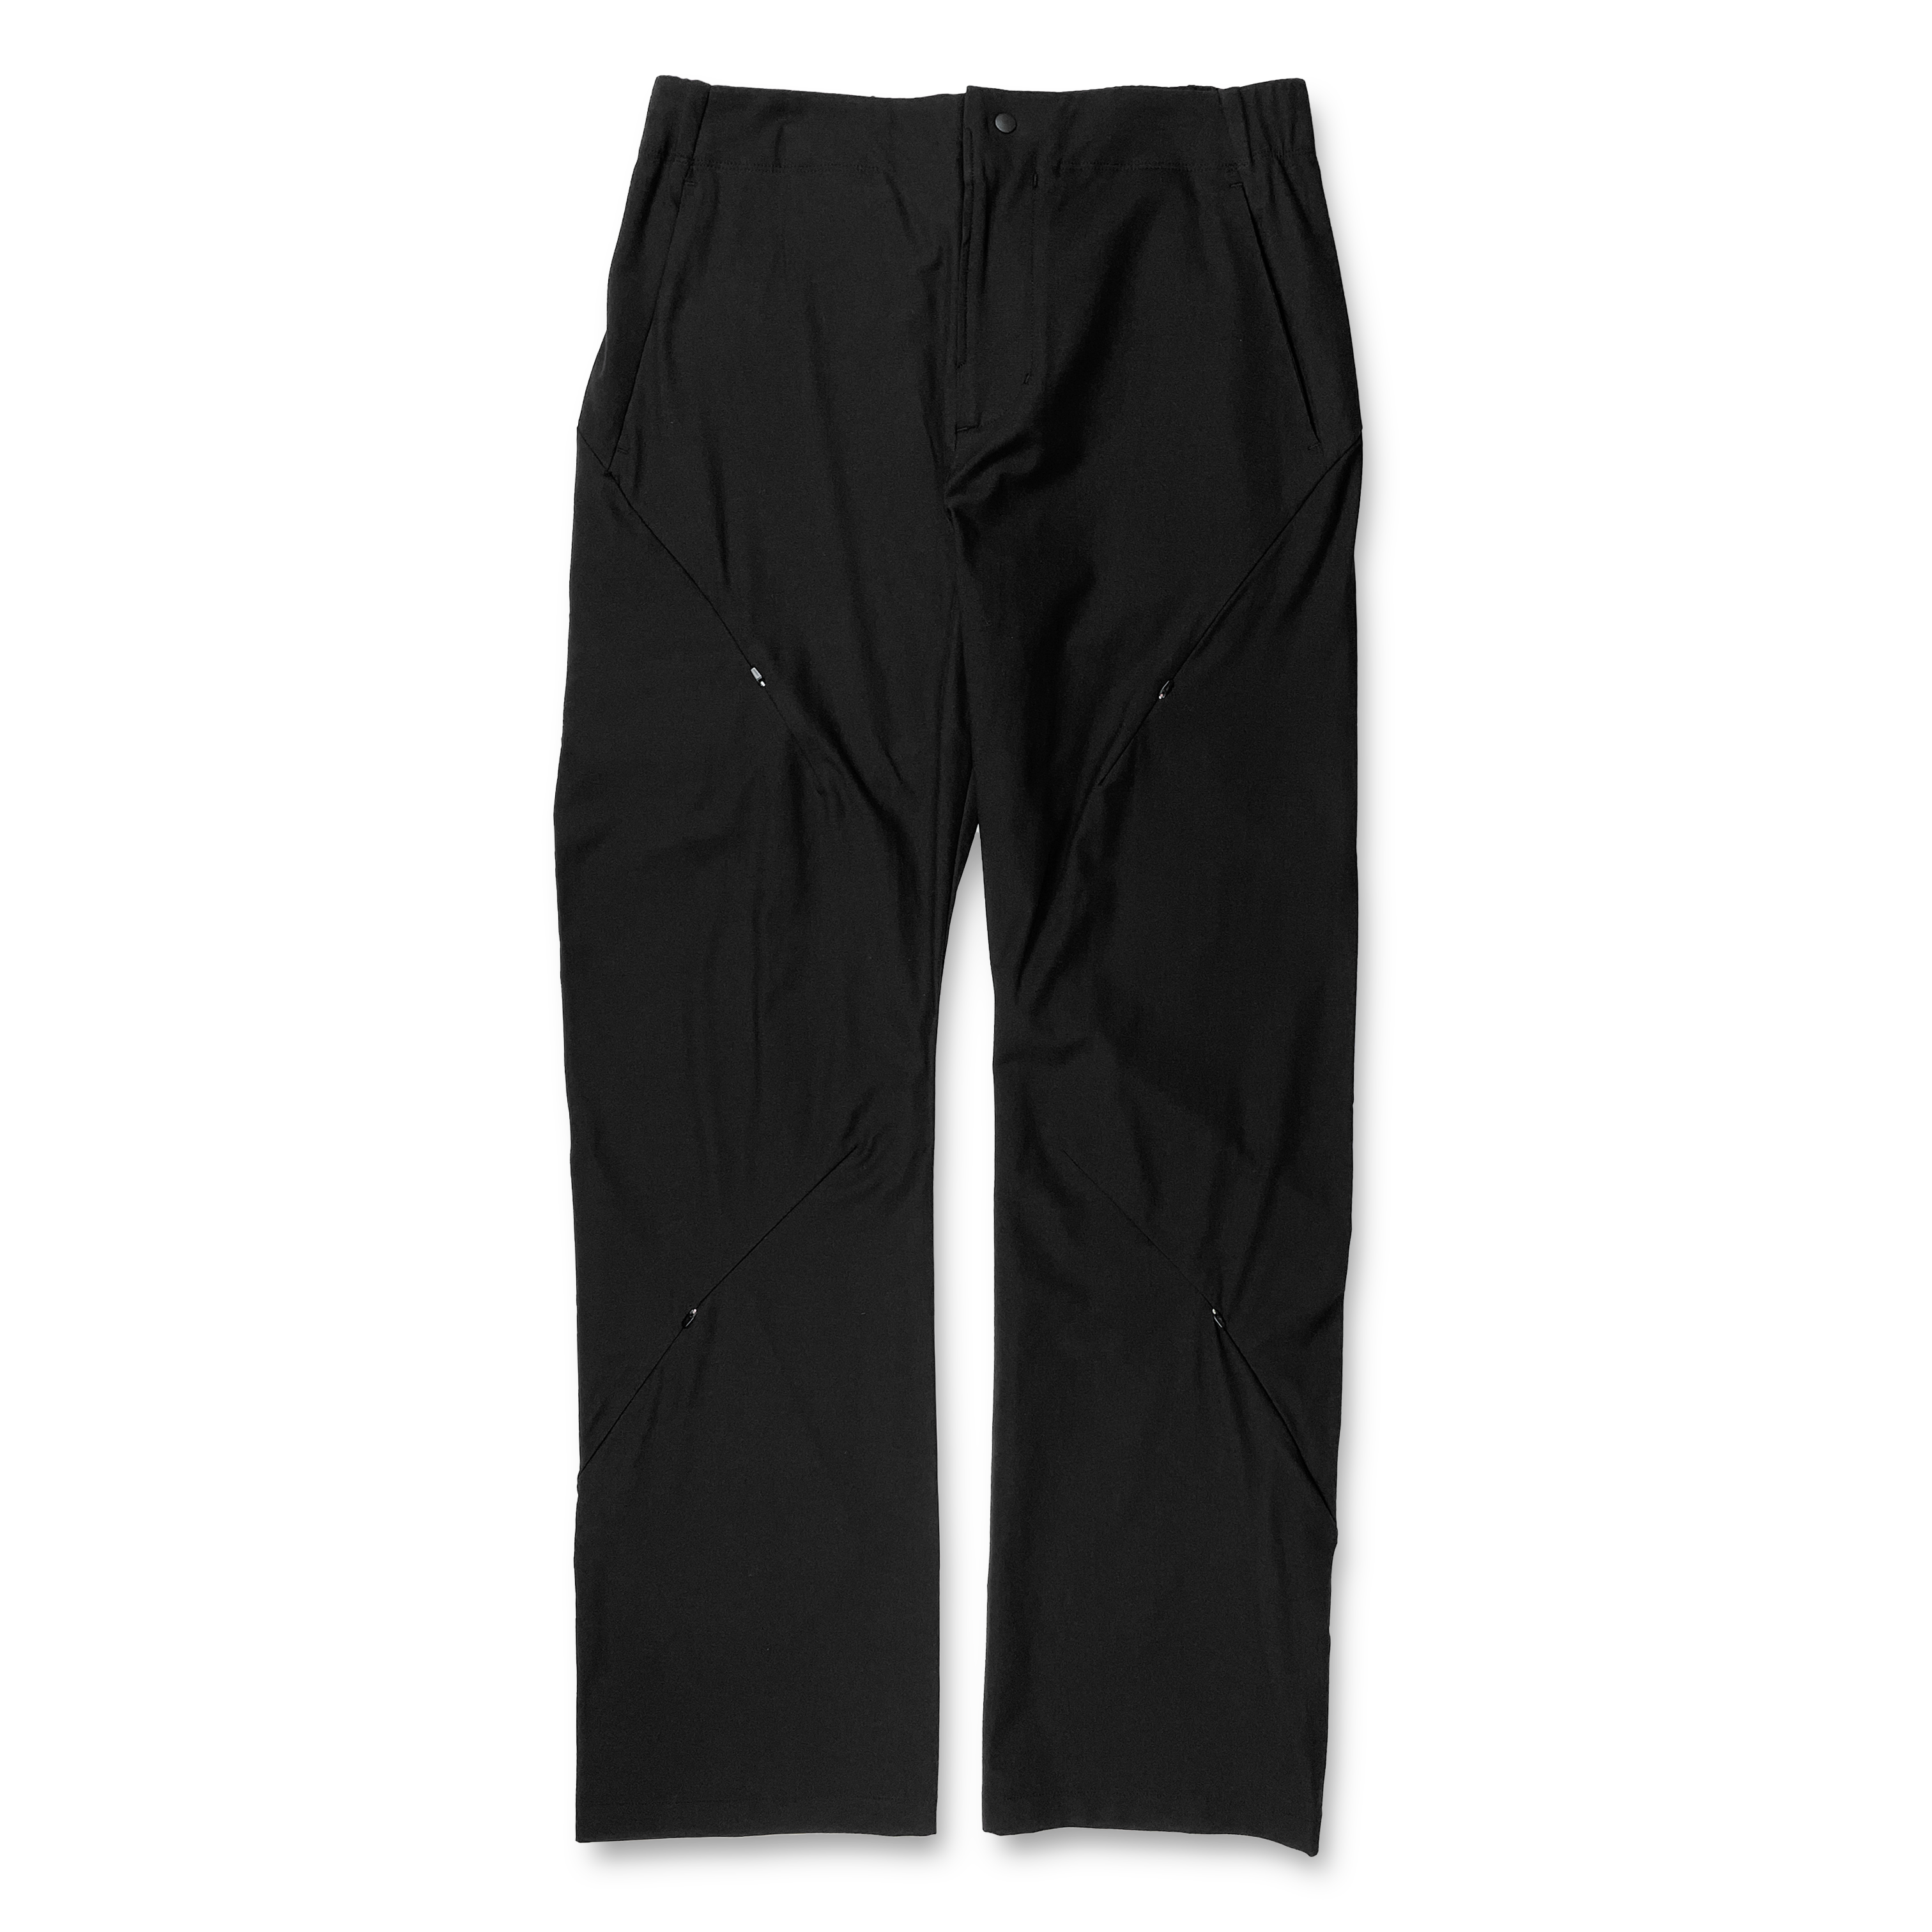 【Post Archive Faction (PAF)】5.1 TECHNICAL PANTS RIGHT